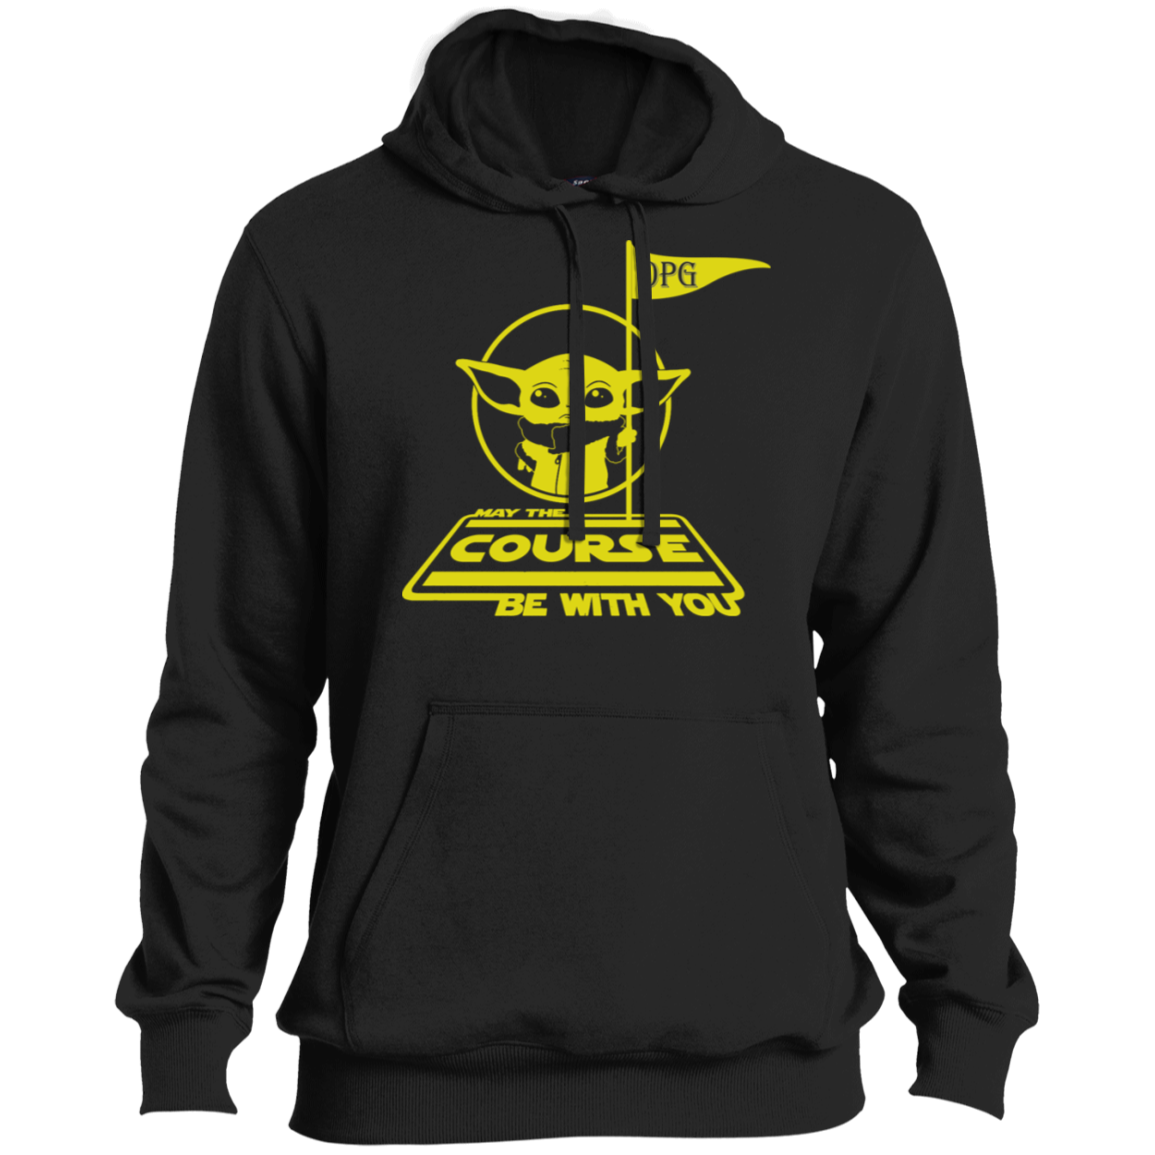 OPG Custom Design #21. May the course be with you. Star Wars Parody and Fan Art. Soft Style Pullover Hoodie